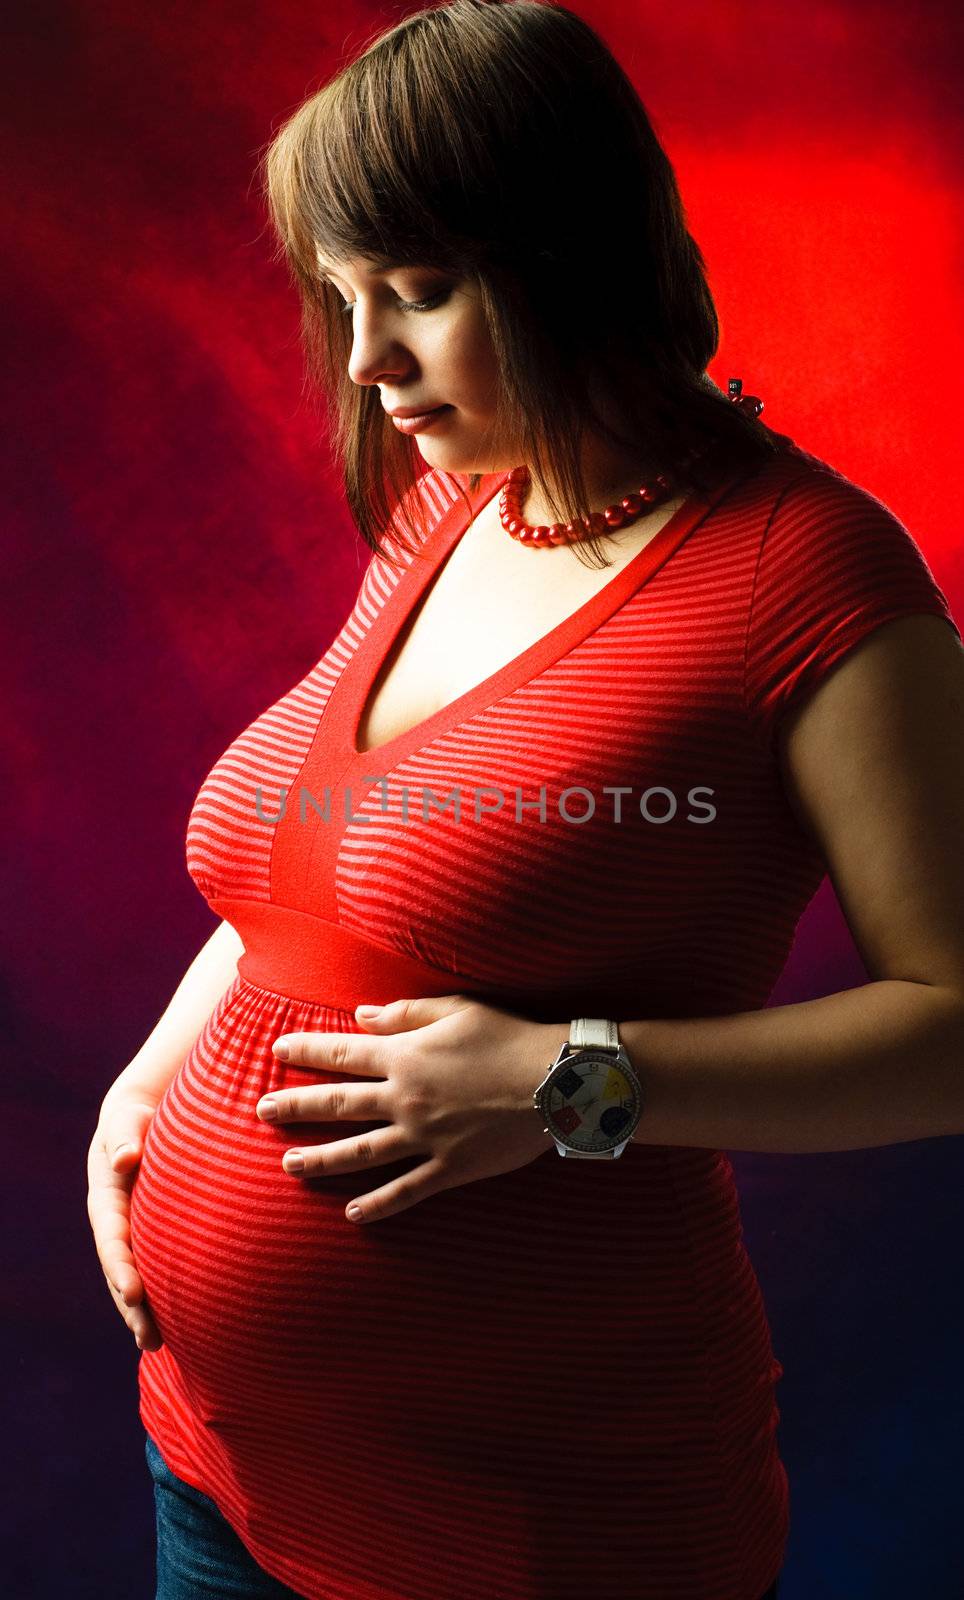 yougn pregnant woman by lanak